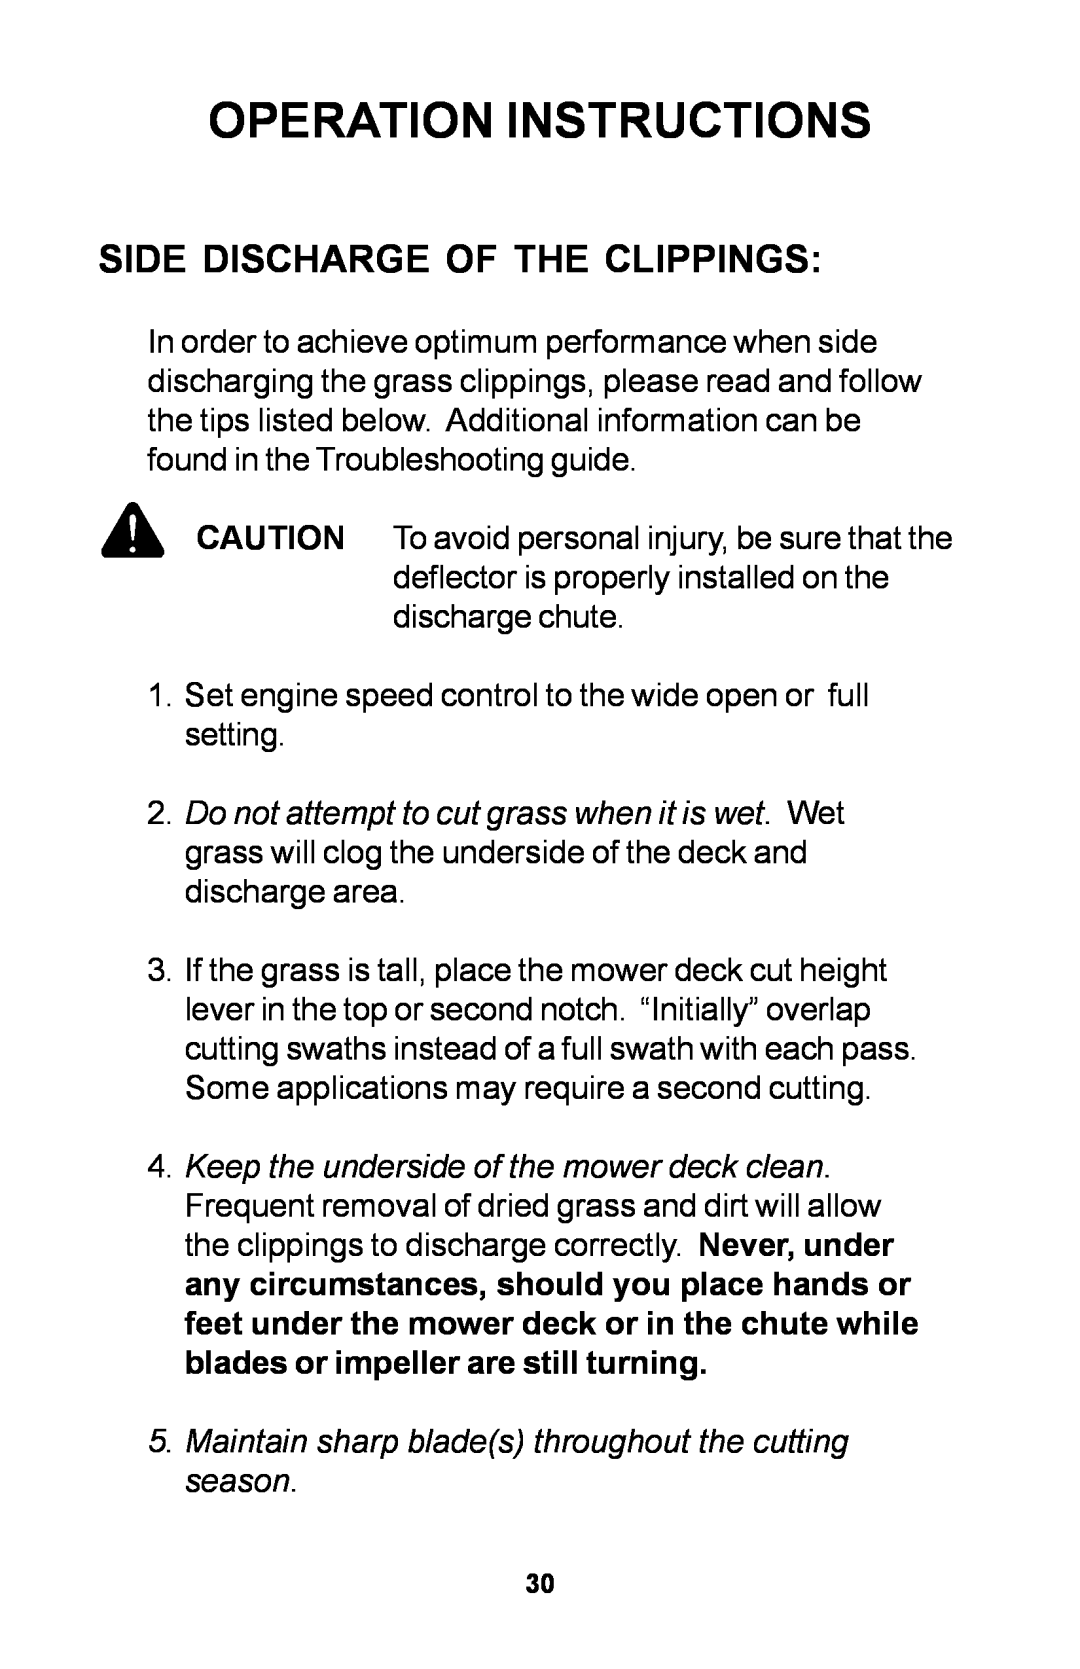 Dixon 30 manual Side Discharge Of The Clippings, Operation Instructions 